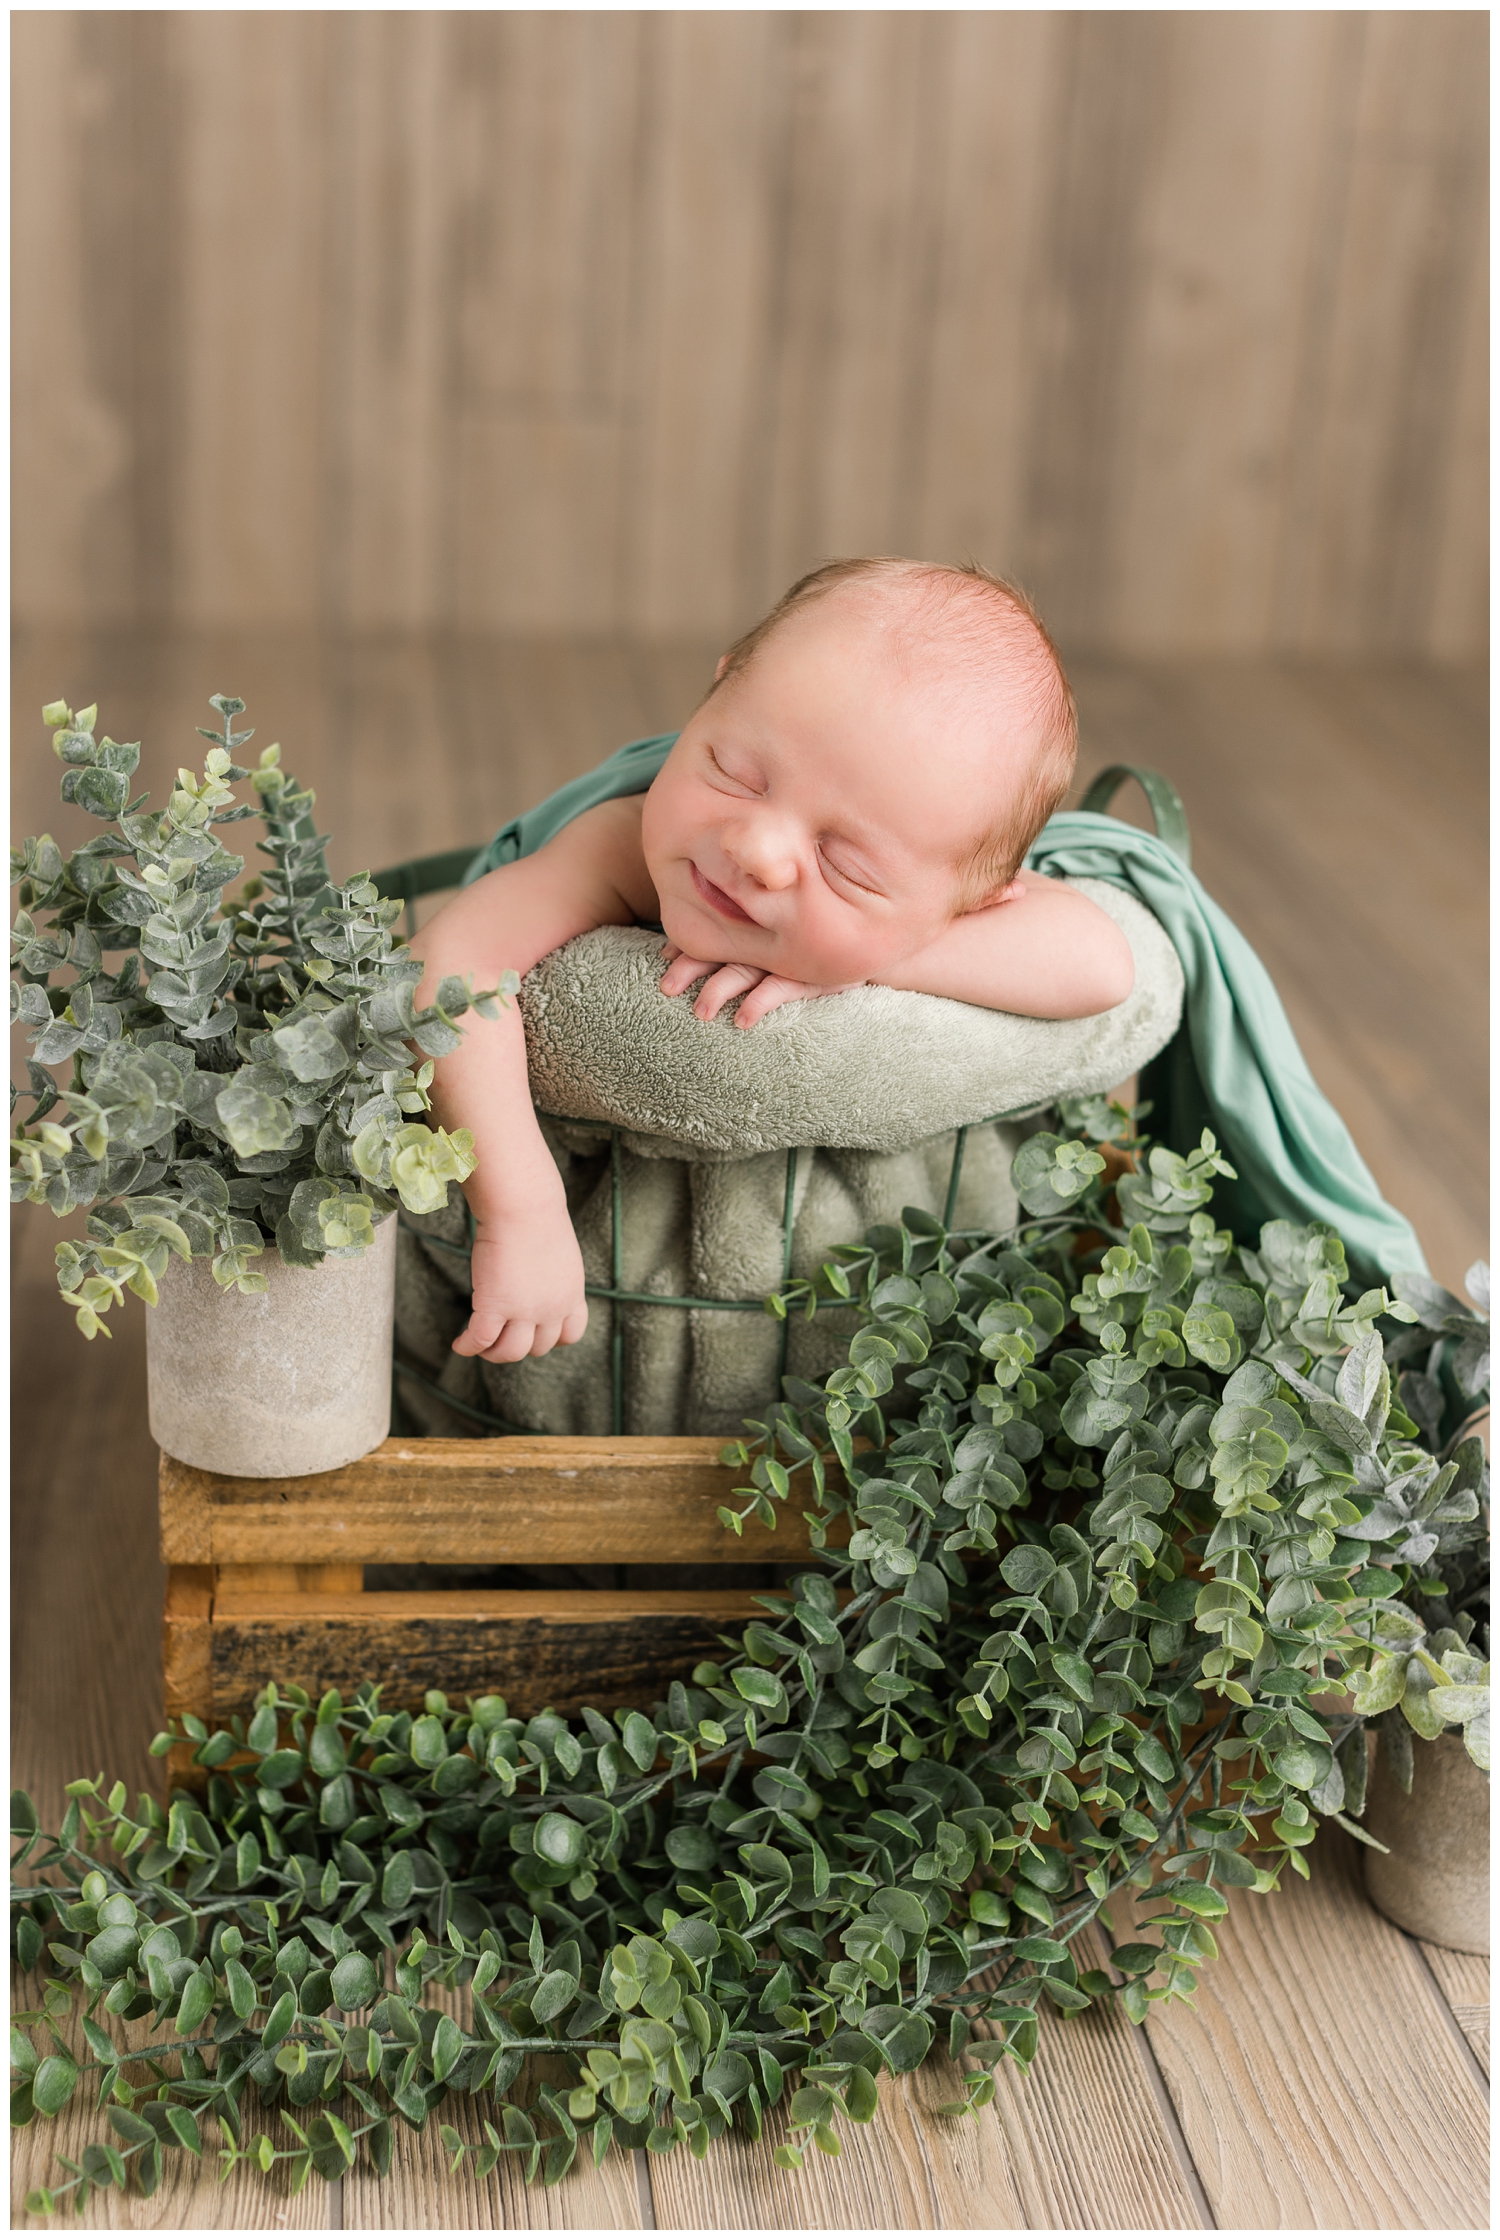 Newborn baby Lewis posed in a bucket surrounded by eucalyptus plants | CB Studio